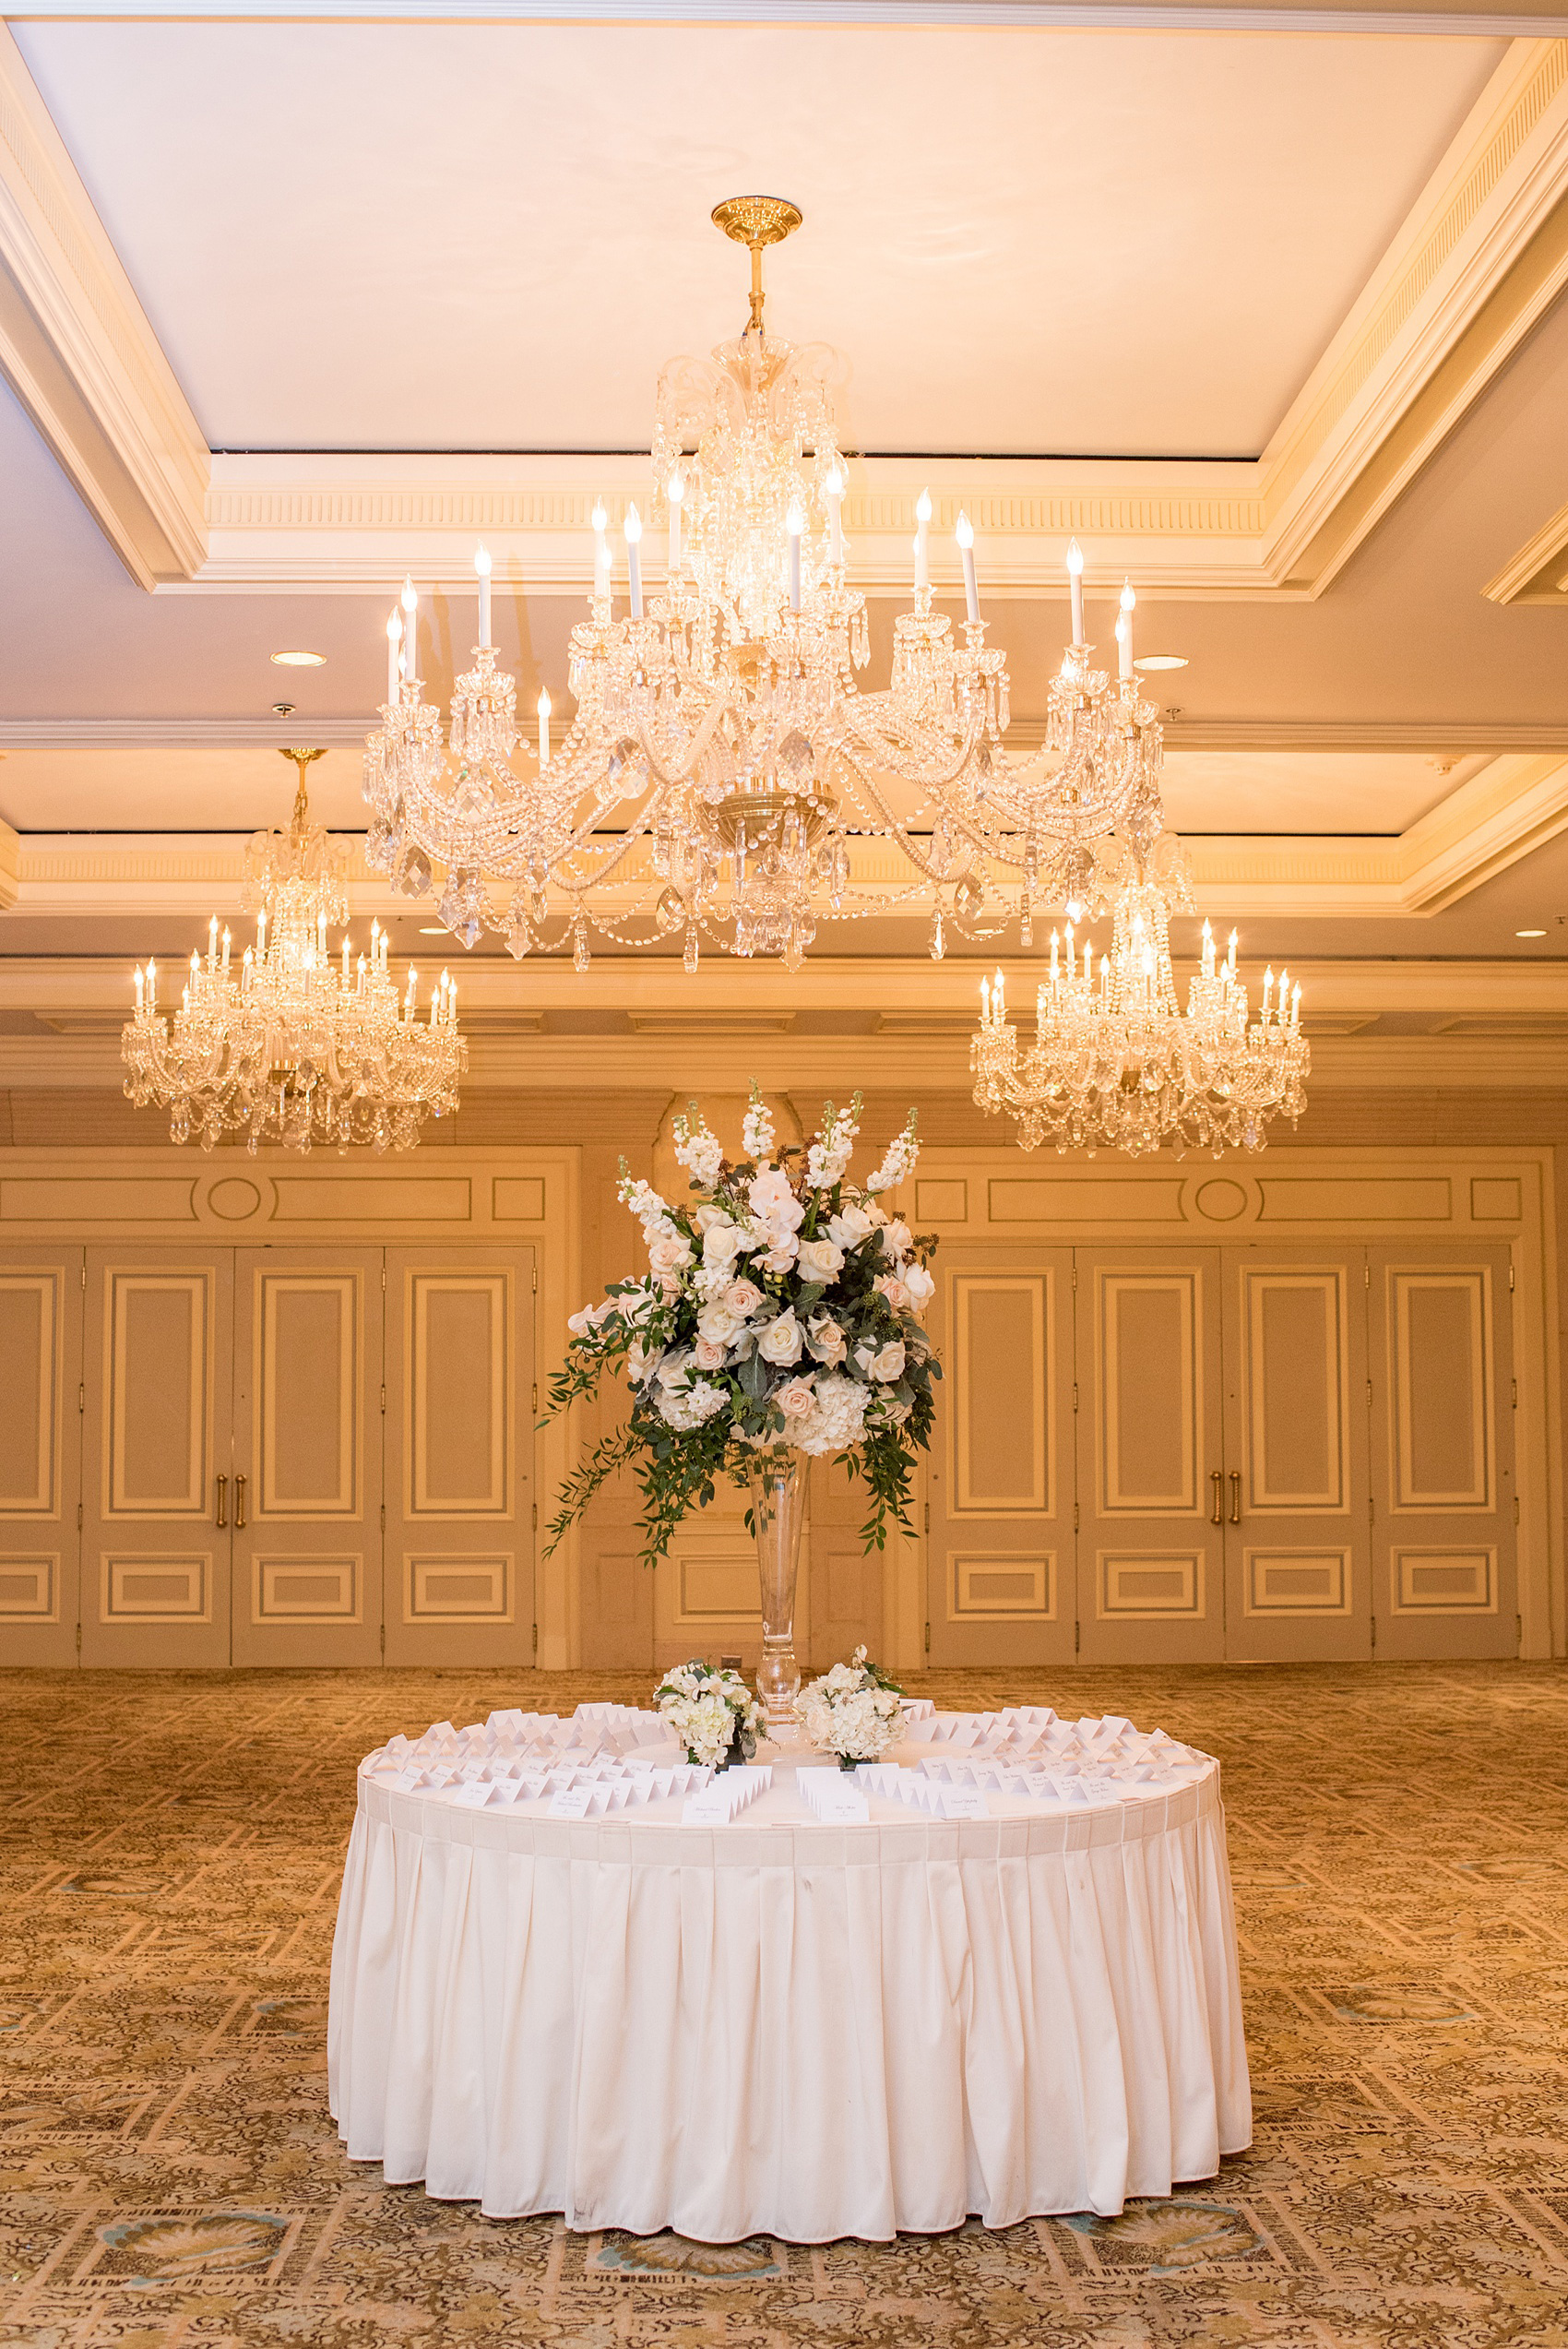 Eau Palm Beach wedding photos by destination photographer, Mikkel Paige. This luxury West Palm Beach, Florida hotel is a beautiful location for a destination wedding. The escort cards were placed on a round table with a tall white flower centerpiece, under three grand chandeliers, leading into the ballroom. Click through to see more! #WestPalmBeach #EauPalmBeach #BeachWedding #FloridaWeddings #BeachBride